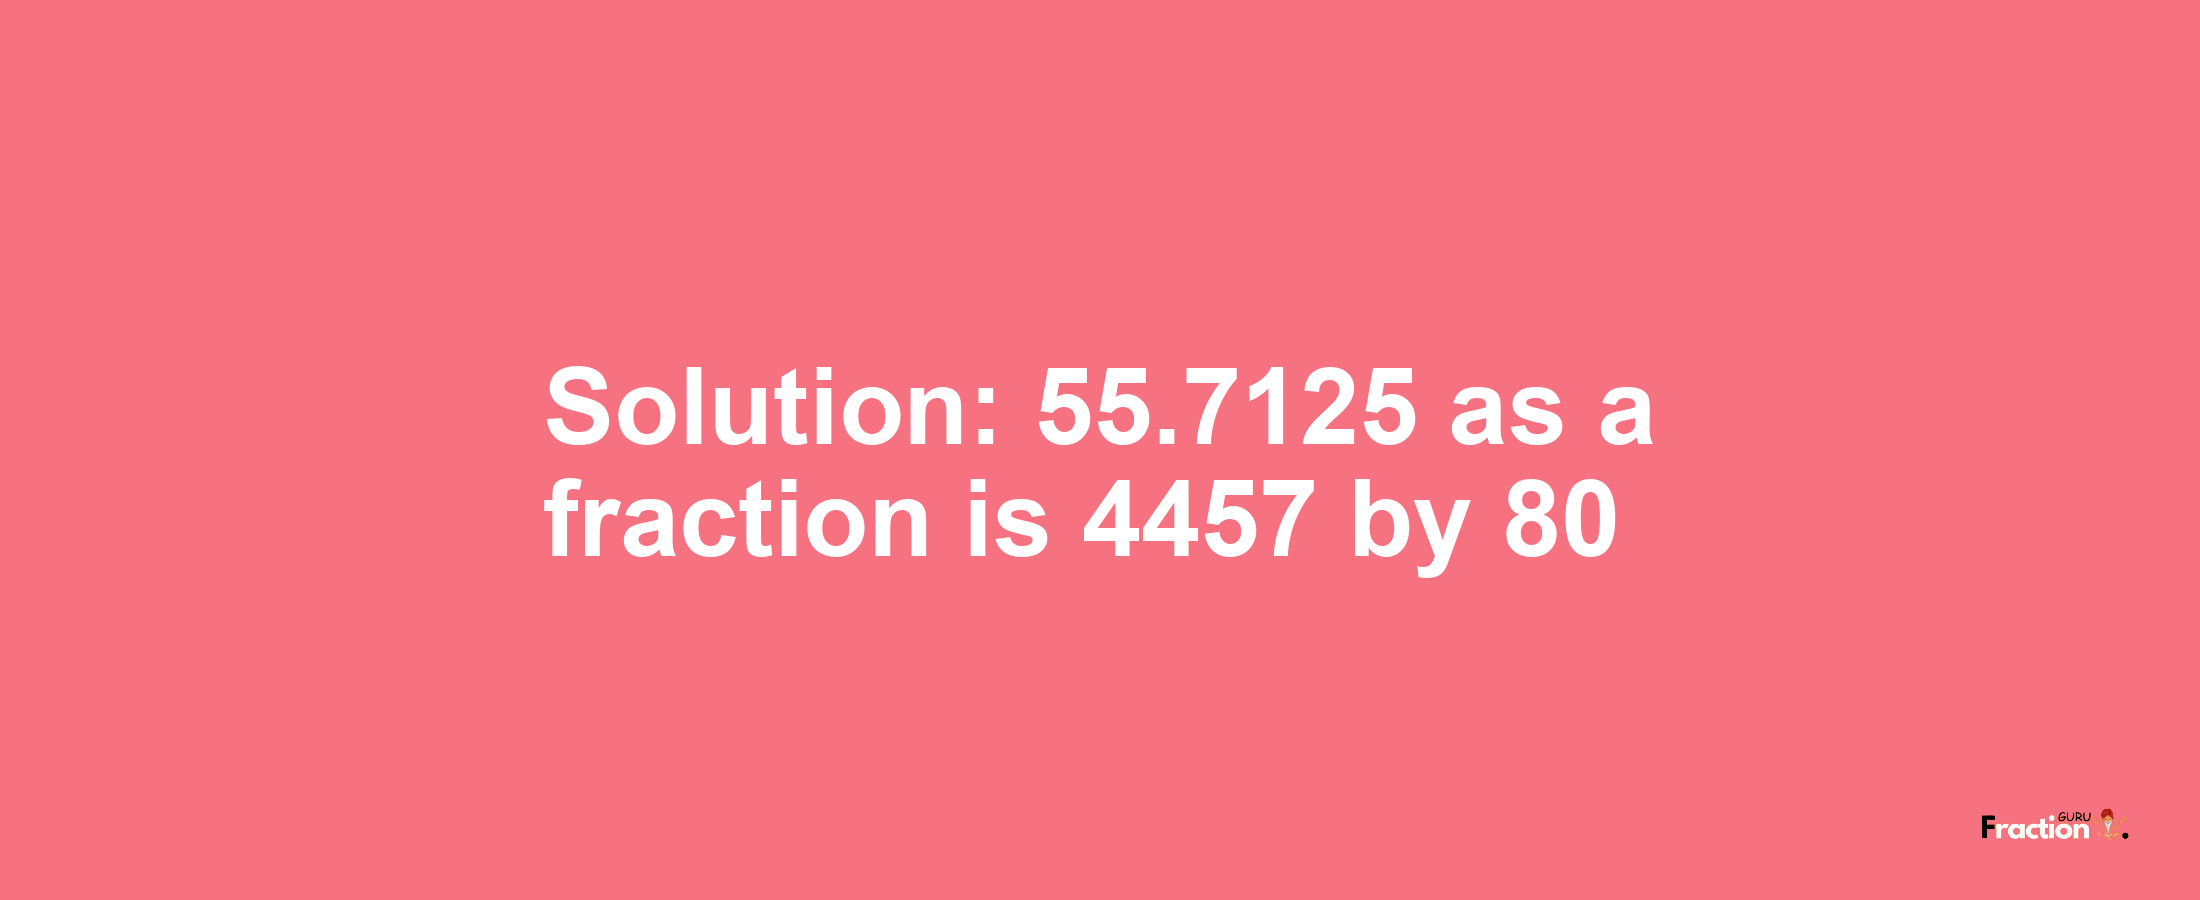 Solution:55.7125 as a fraction is 4457/80